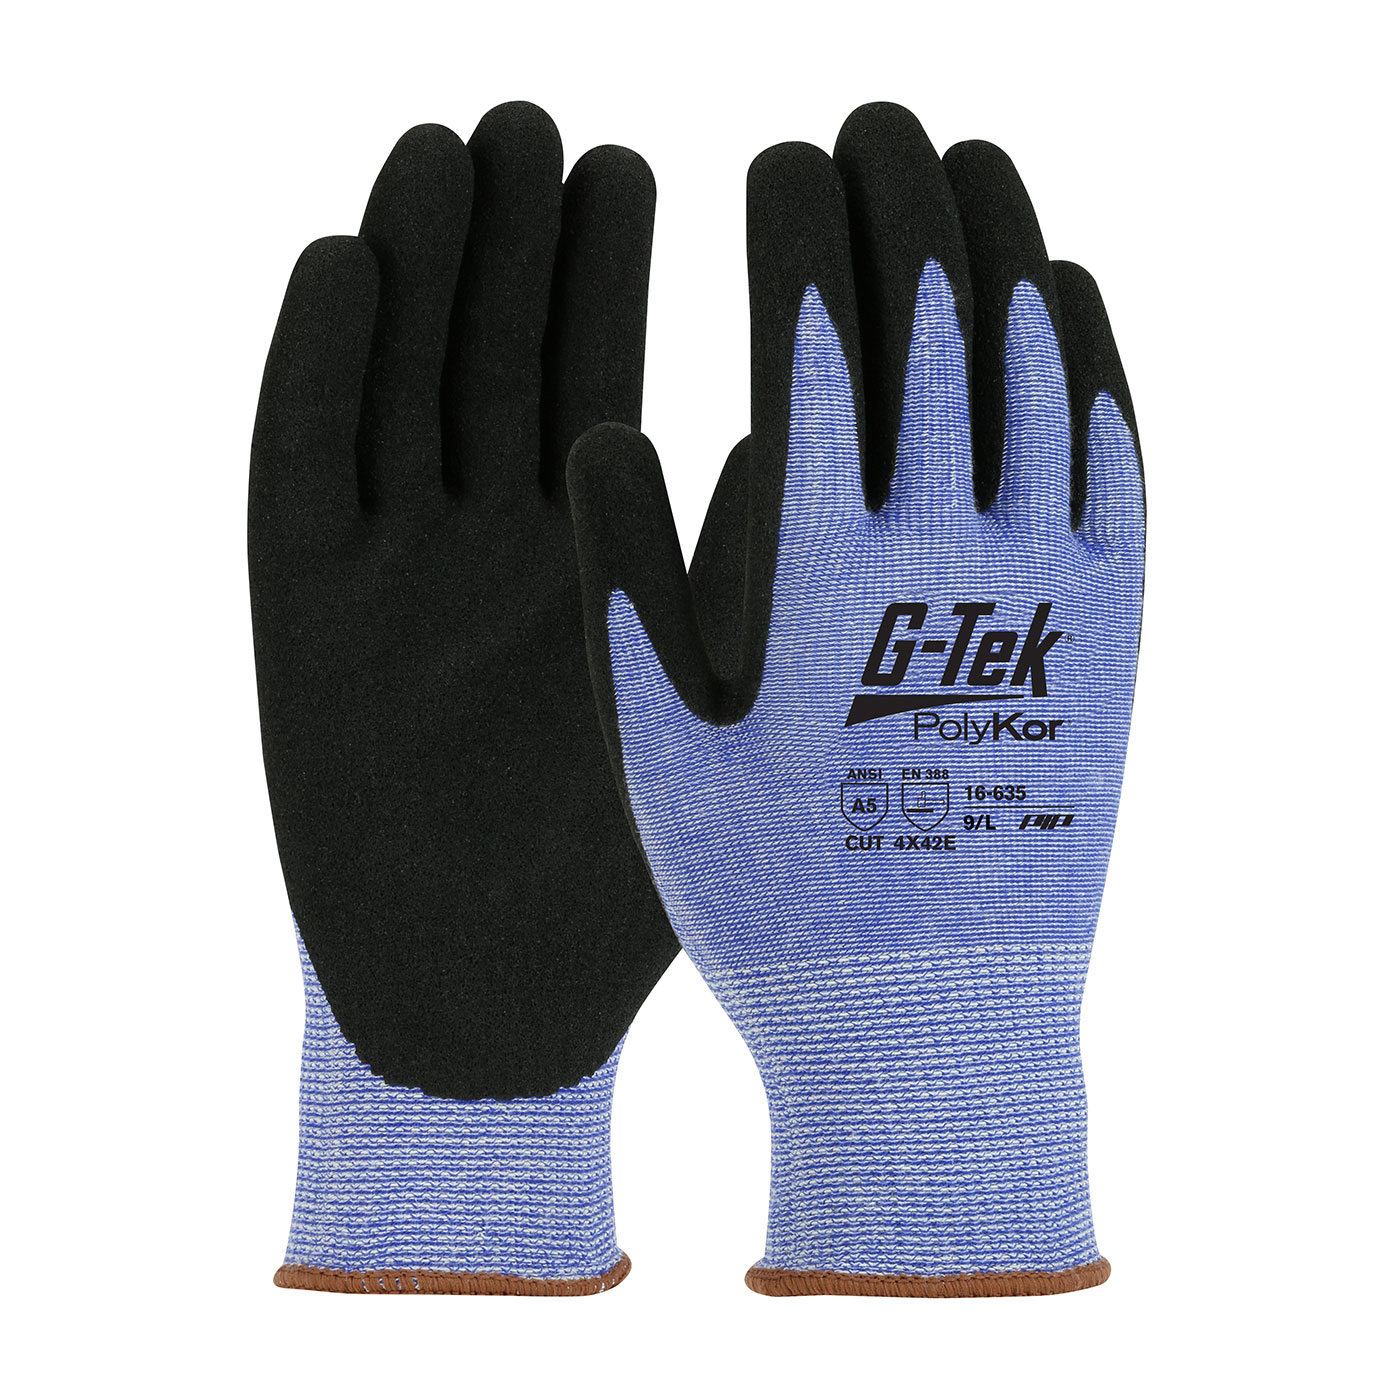 PIP 16-635/L G-Tek PolyKor Seamless Knit PolyKor Blended Glove with Nitrile Coated MicroSurface Grip on Palm & Fingers - Large PID-16635L